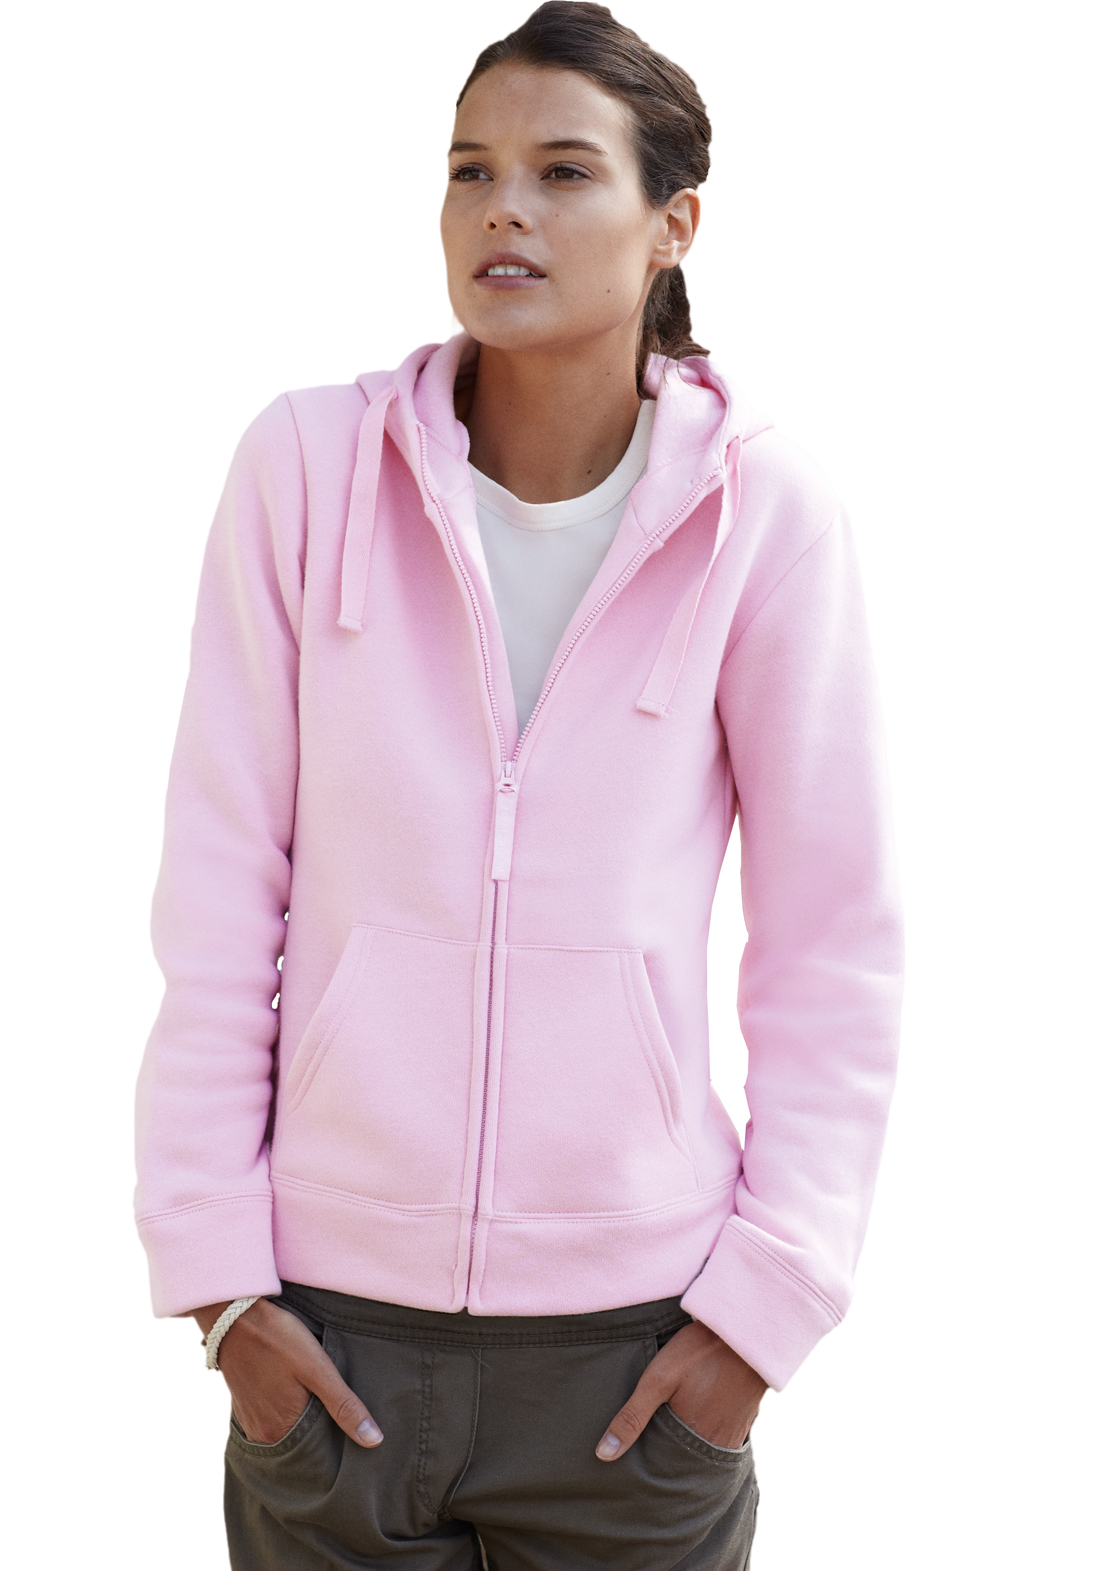 Fruit of the Loom Lady Fit Hooded Jacket